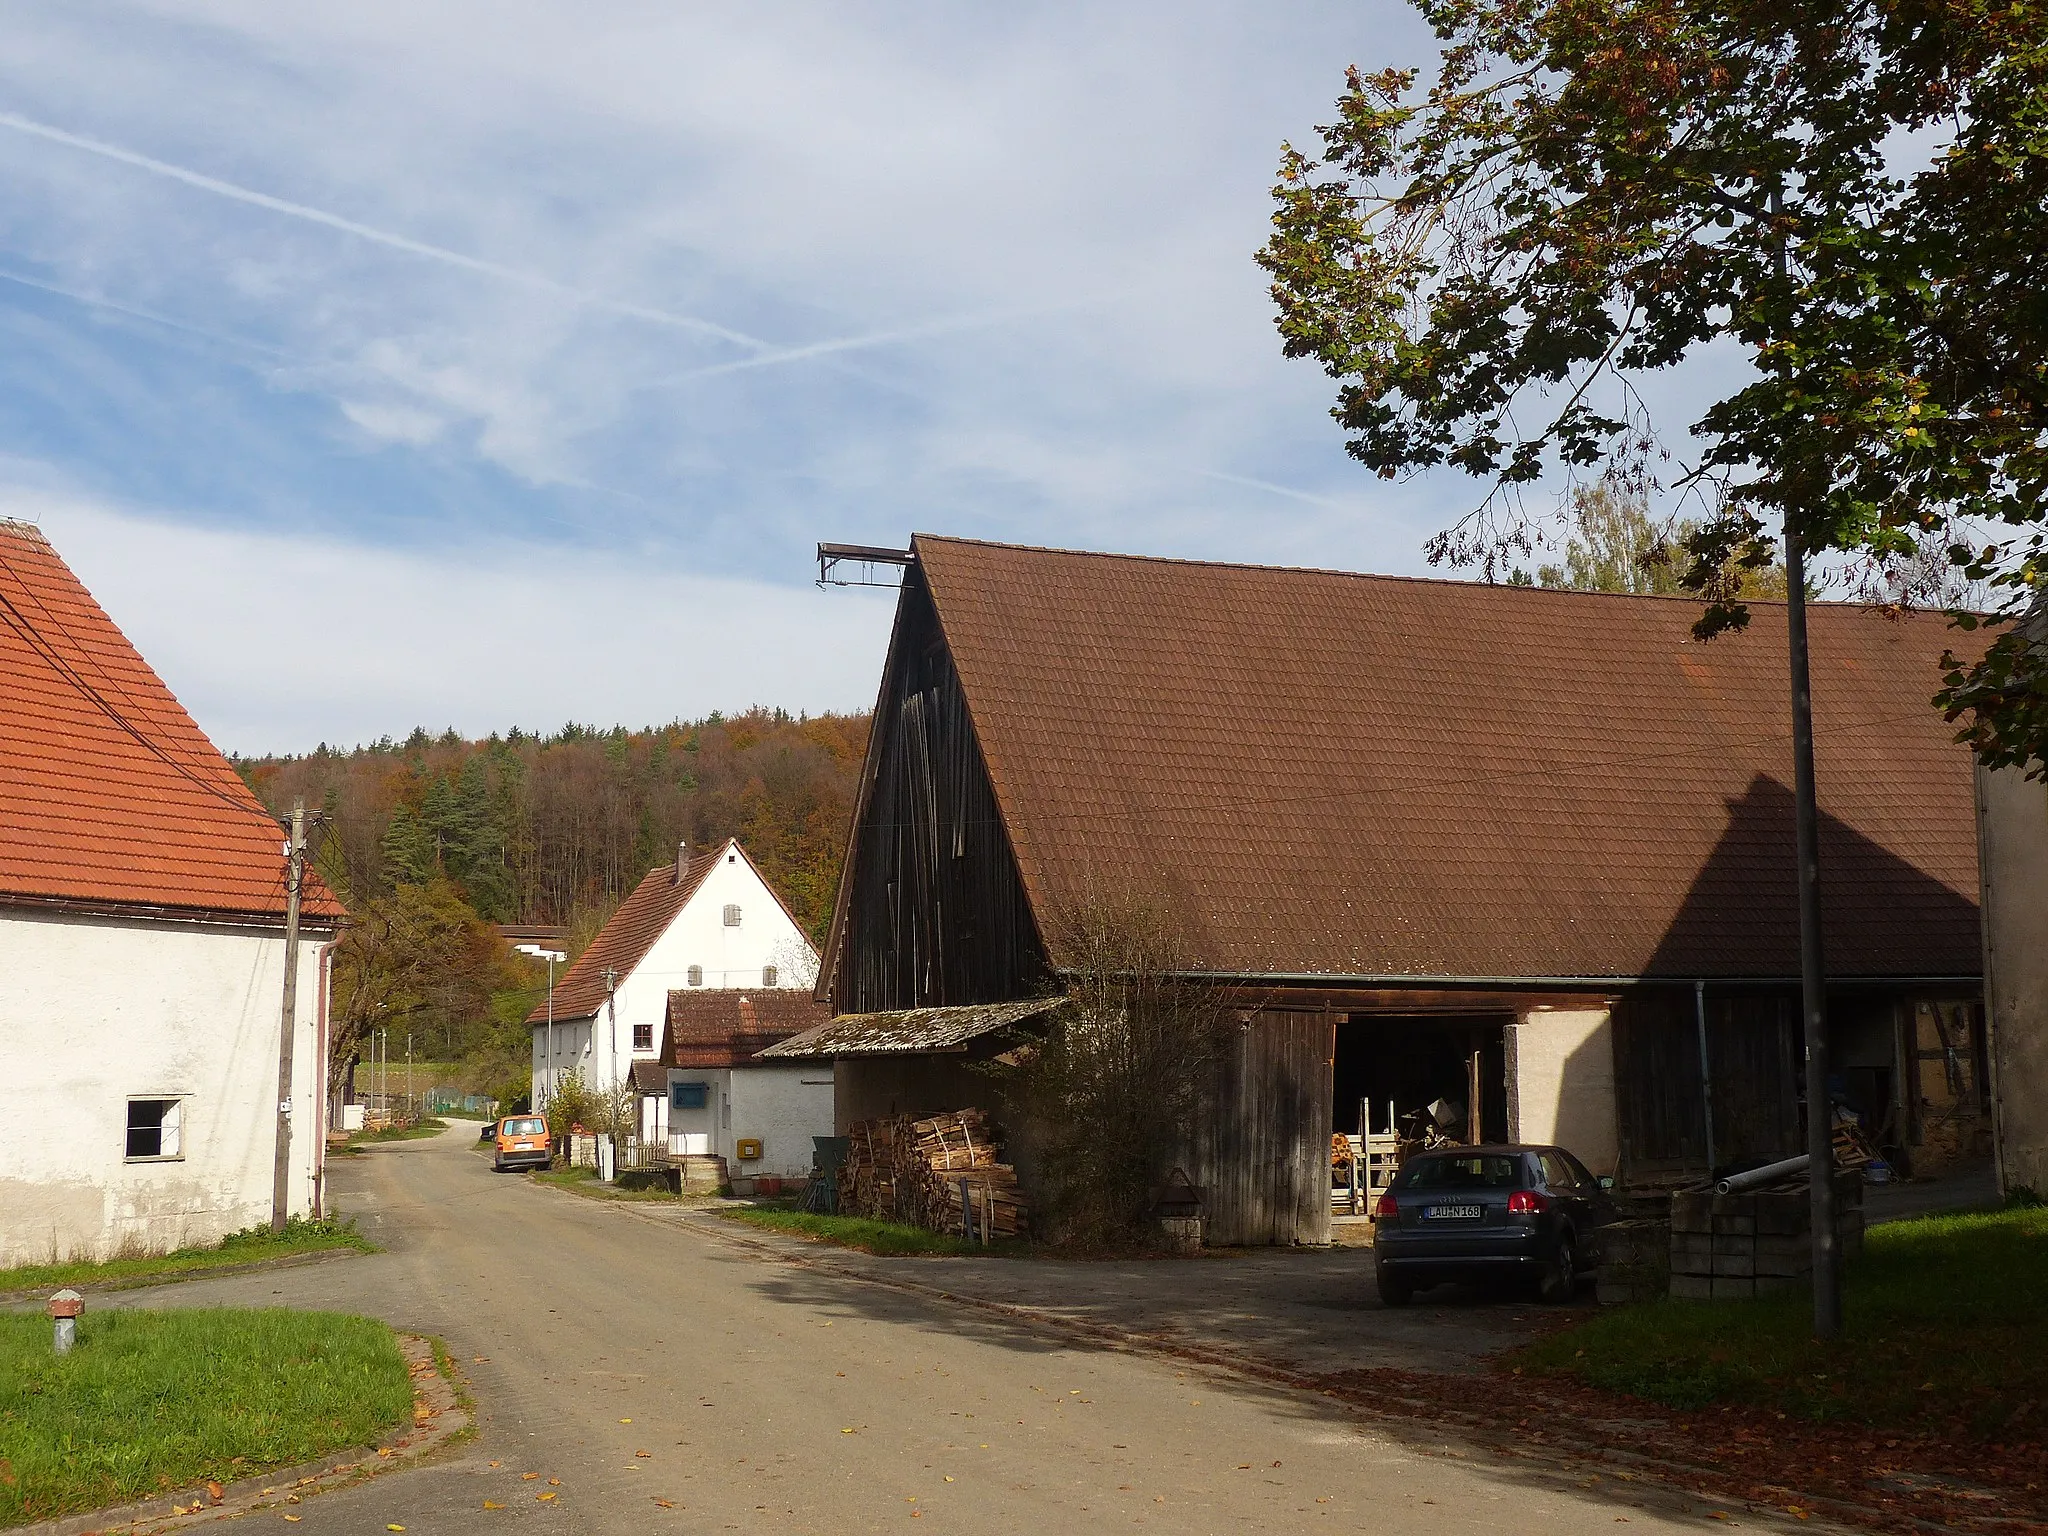 Photo showing: The village Reipertsgesee, a district of the town of Betzenstein.